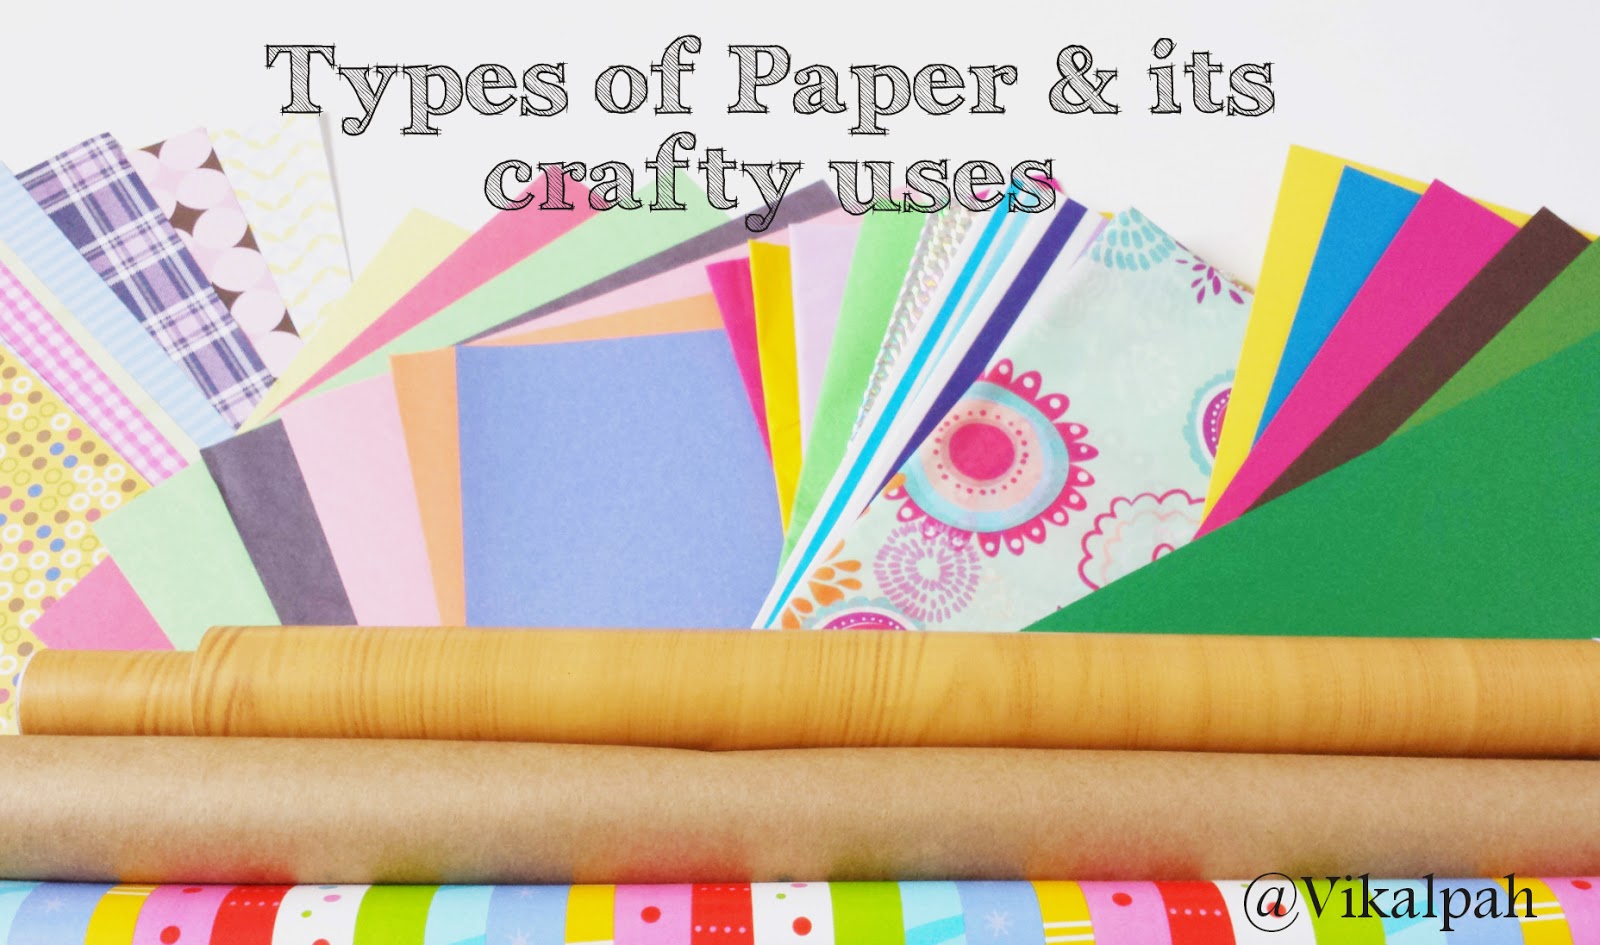 vikalpah-let-s-talk-about-paper-types-of-paper-its-crafty-uses